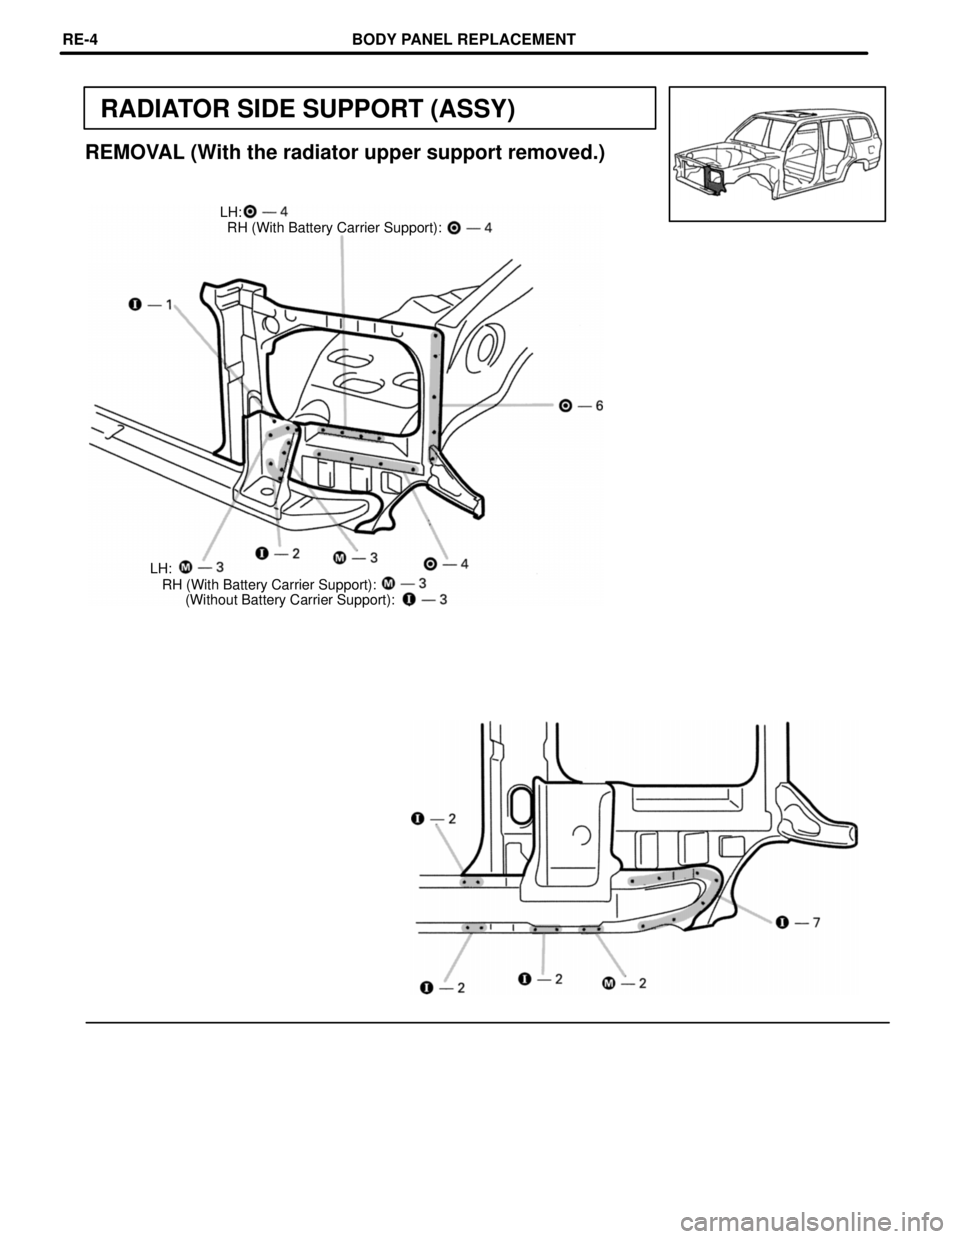 TOYOTA LAND CRUISER 1986  Factory Owners Manual RADIATOR SIDE SUPPORT (ASSY)
(Without Battery Carrier Support): RH (With Battery Carrier Support):
REMOVAL (With the radiator upper support removed.)
LH:
RH (With Battery Carrier Support):
LH:
BODY PA